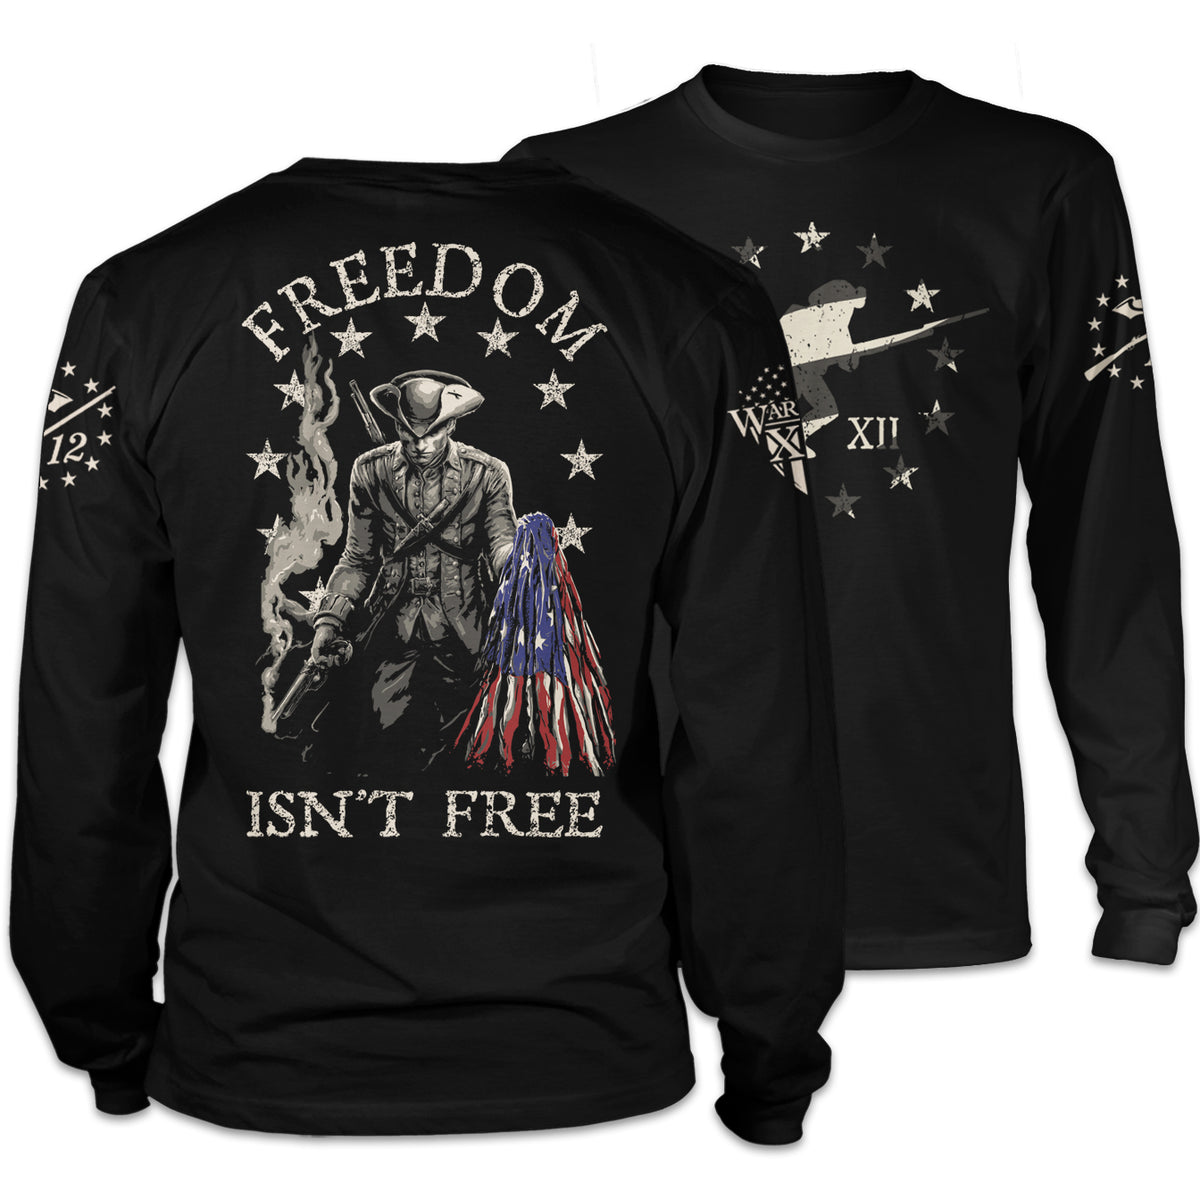 Front & back long sleeve shirt pays tribute to the Minuteman, the original American Patriot, and our forefathers who fought relentlessly against the tyranny of Britain.The back of the shirt has an infaltry soldier holding a ripped USA flag printed on it.